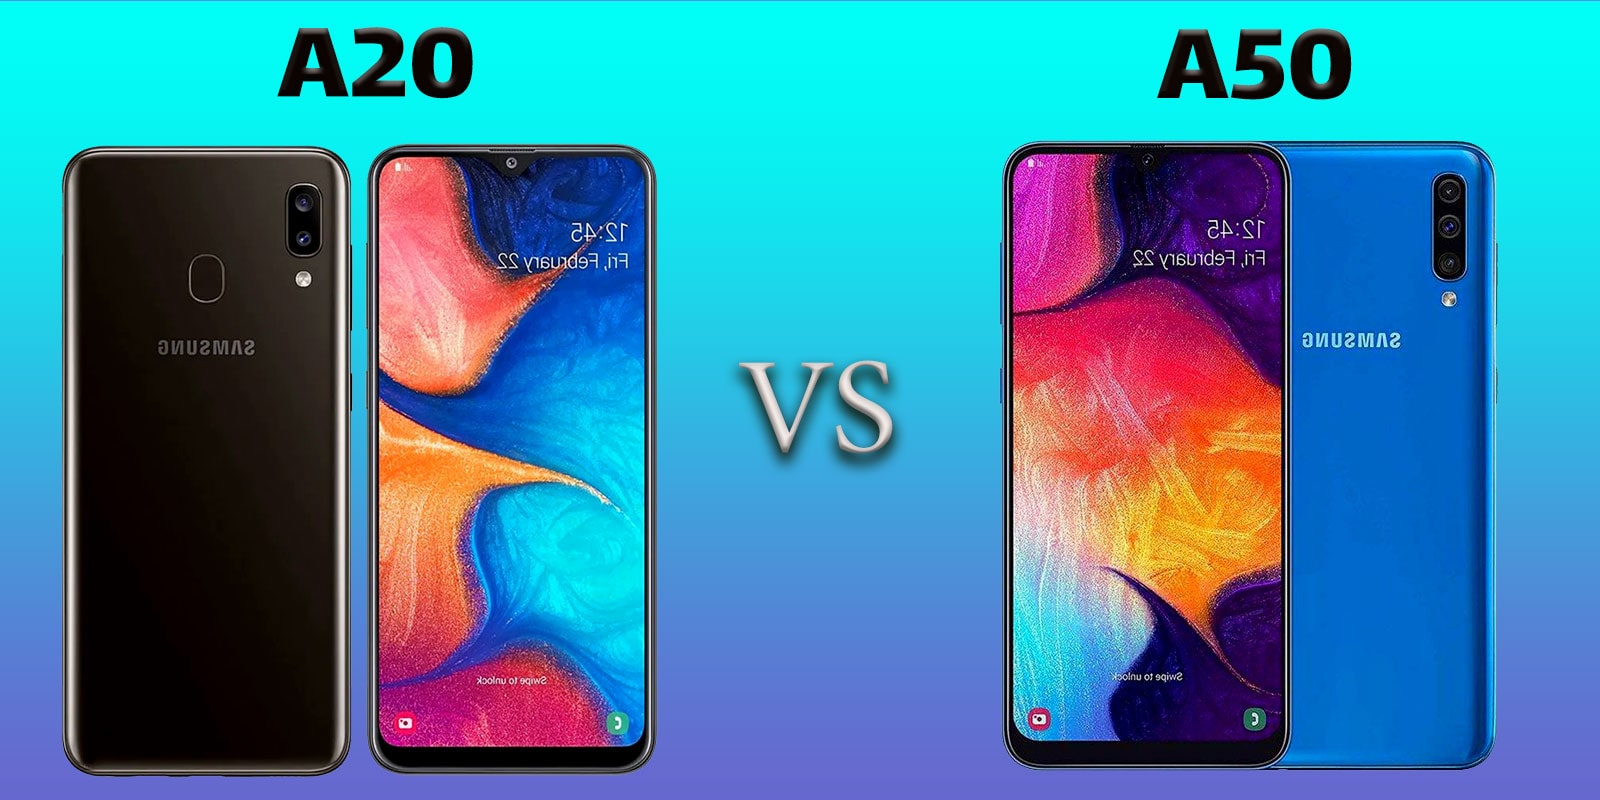 What Is the Difference Between Samsung A20 and A50